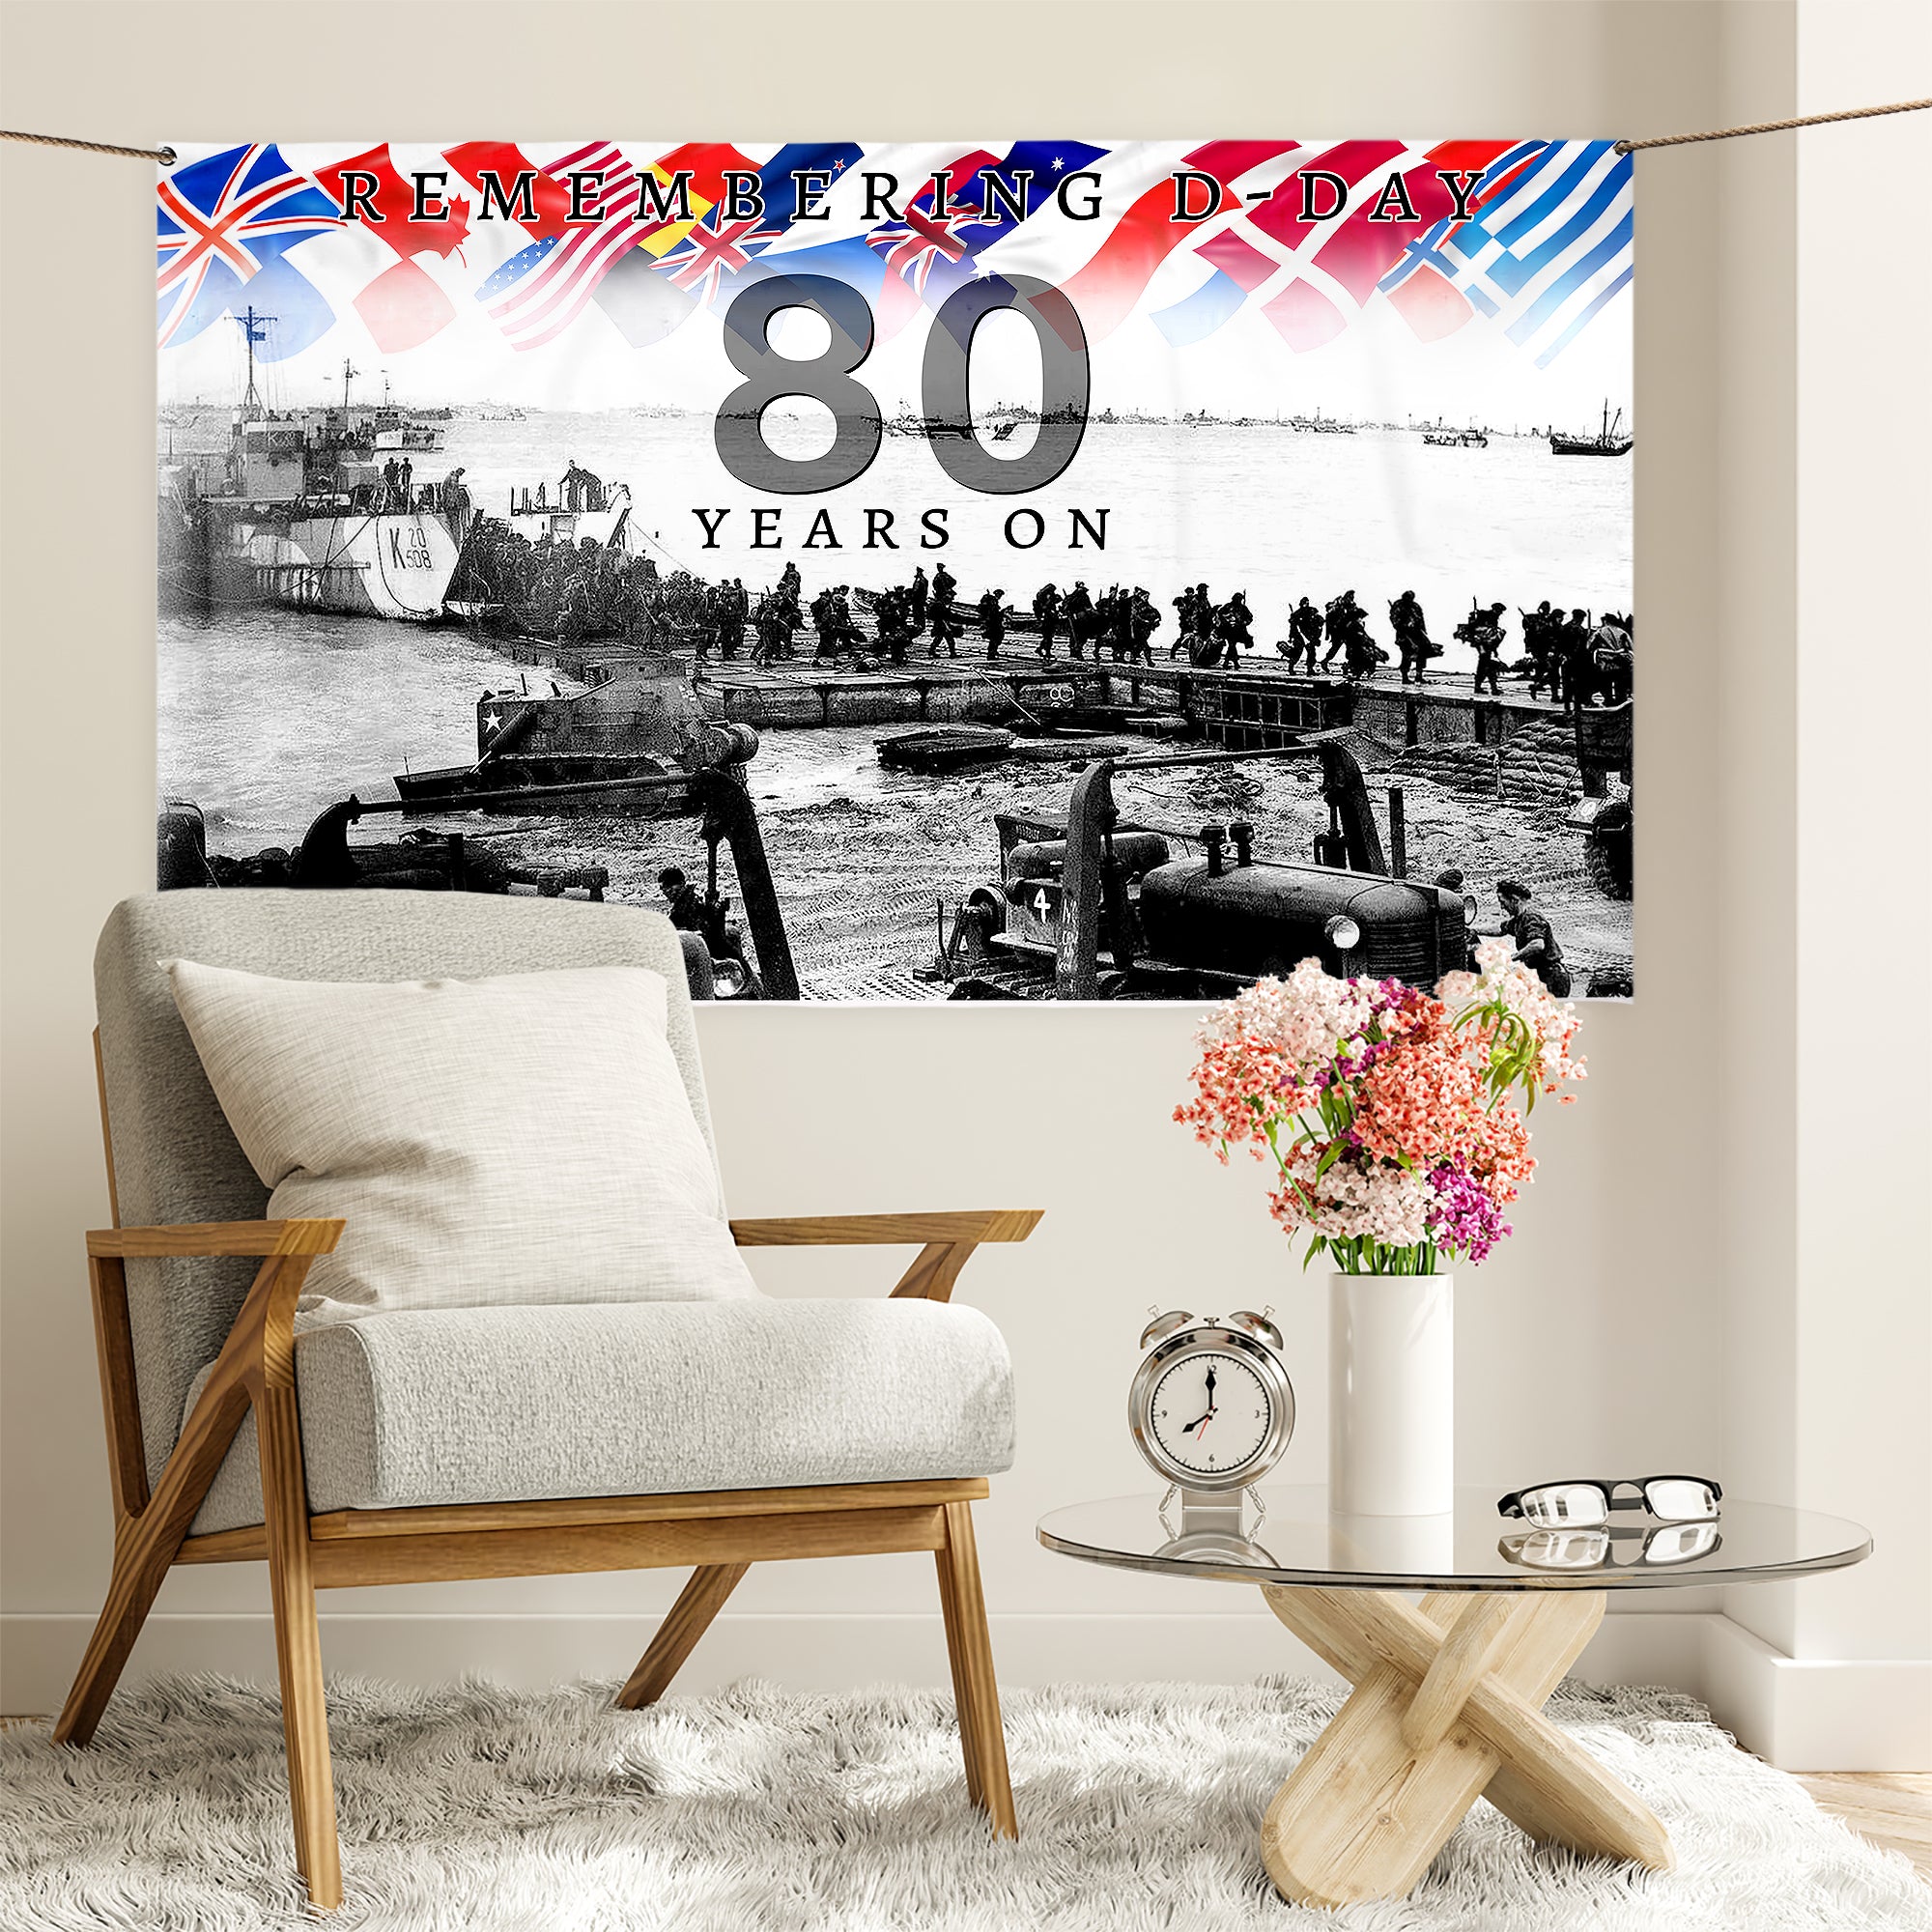 Remembering D-Day 80 Years | Banner - 5ft x 3ft